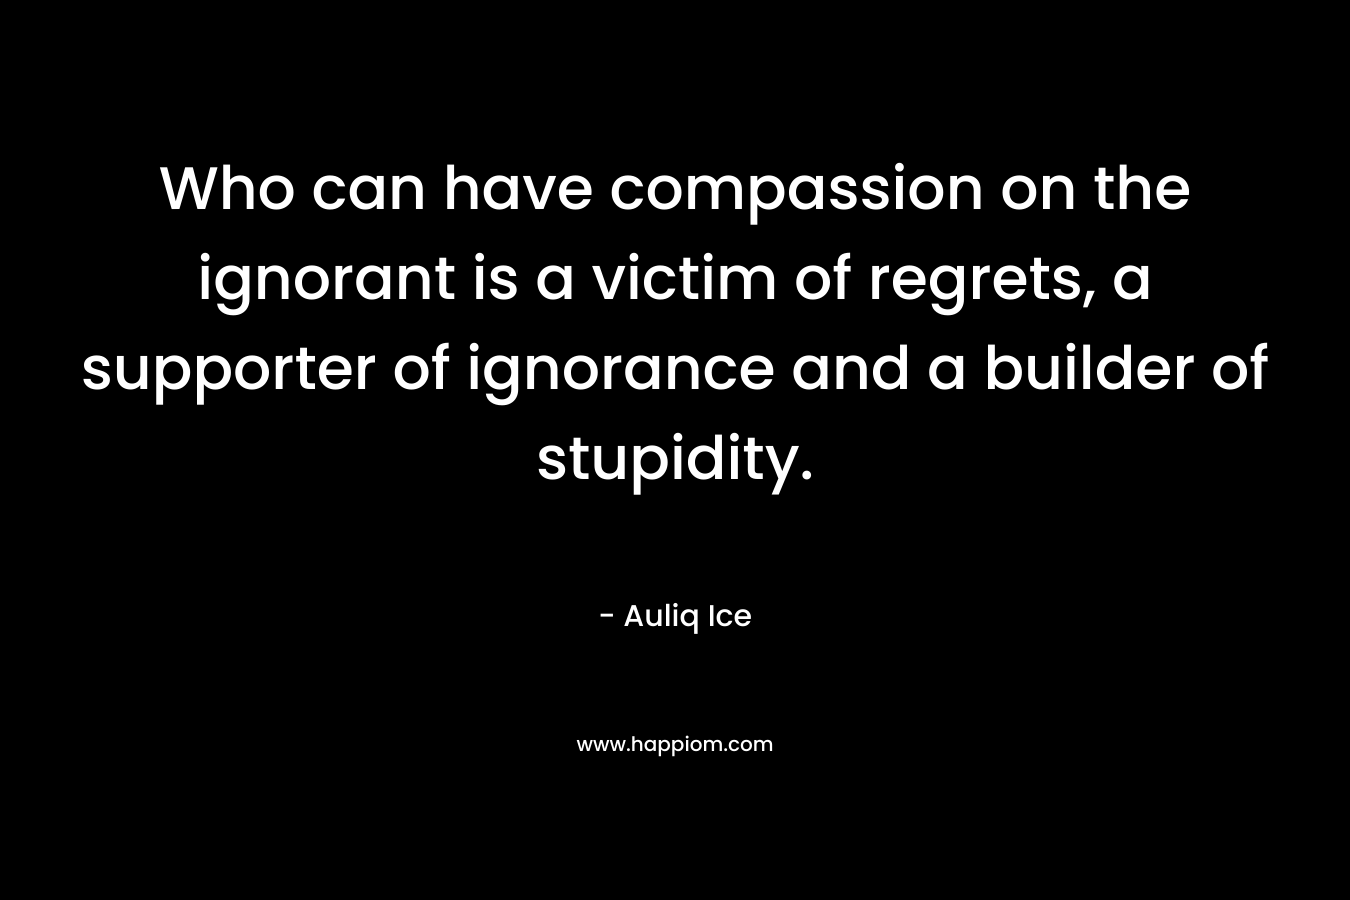 Who can have compassion on the ignorant is a victim of regrets, a supporter of ignorance and a builder of stupidity.